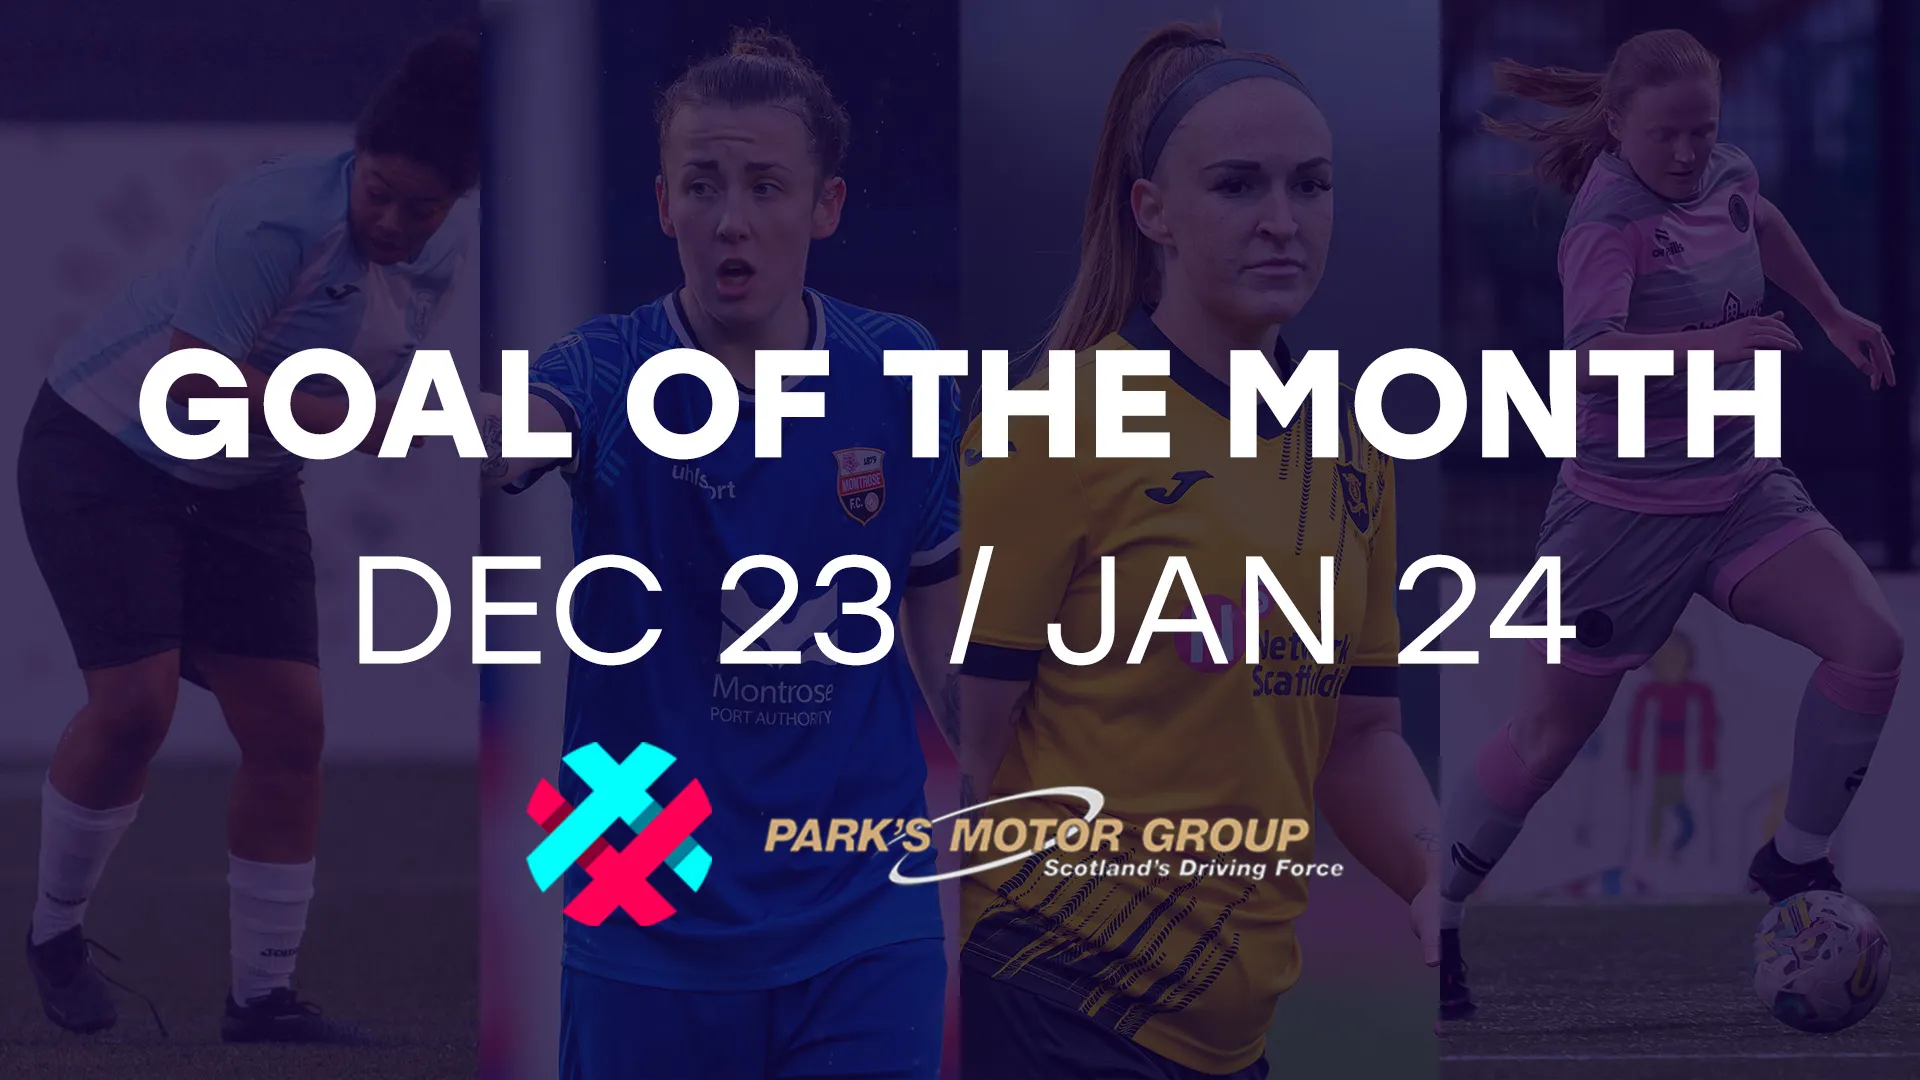 Image for SWPL Goal of the Month, Dec 23 / Jan 24 | Supported by Park’s Motor Group